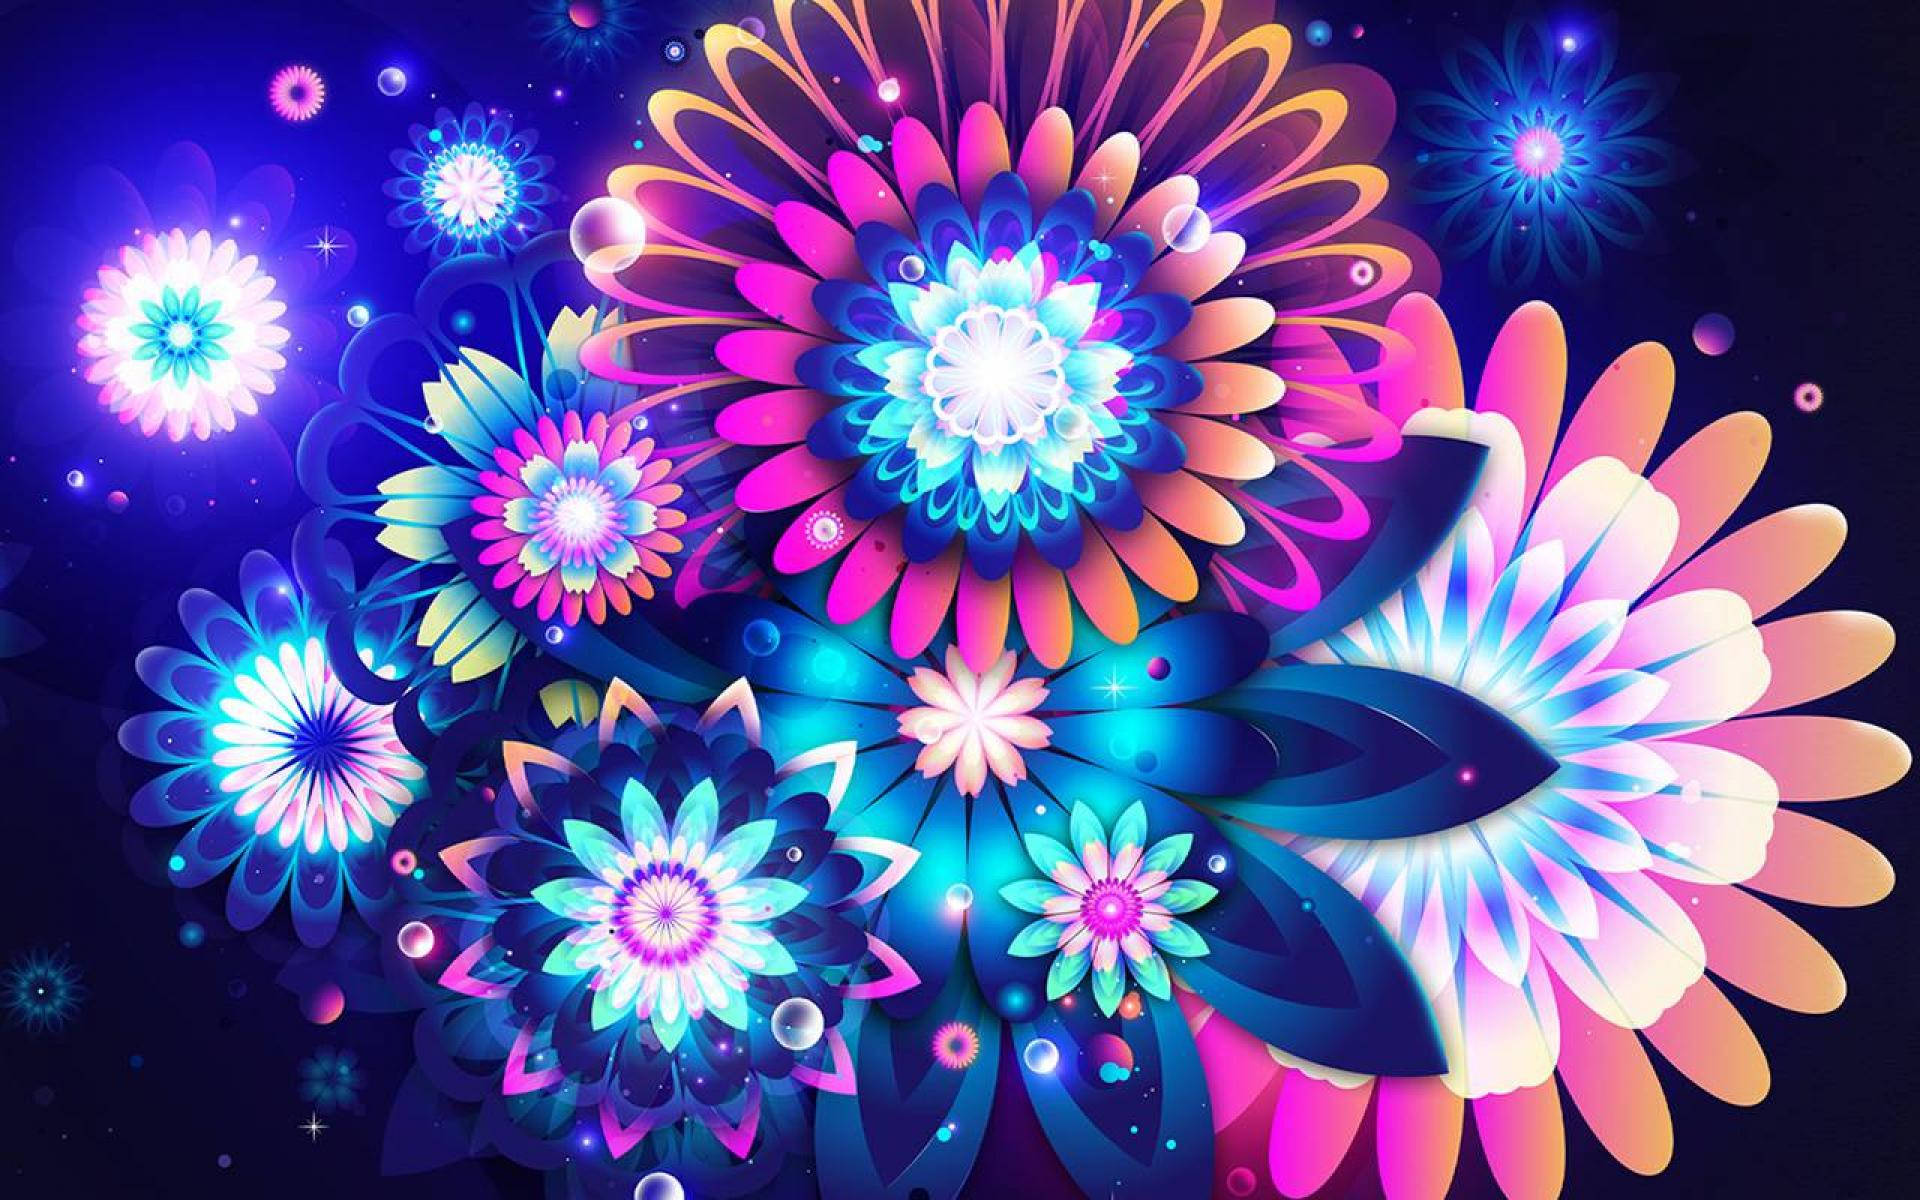 A Colorful Flower Design With Bright Lights Background